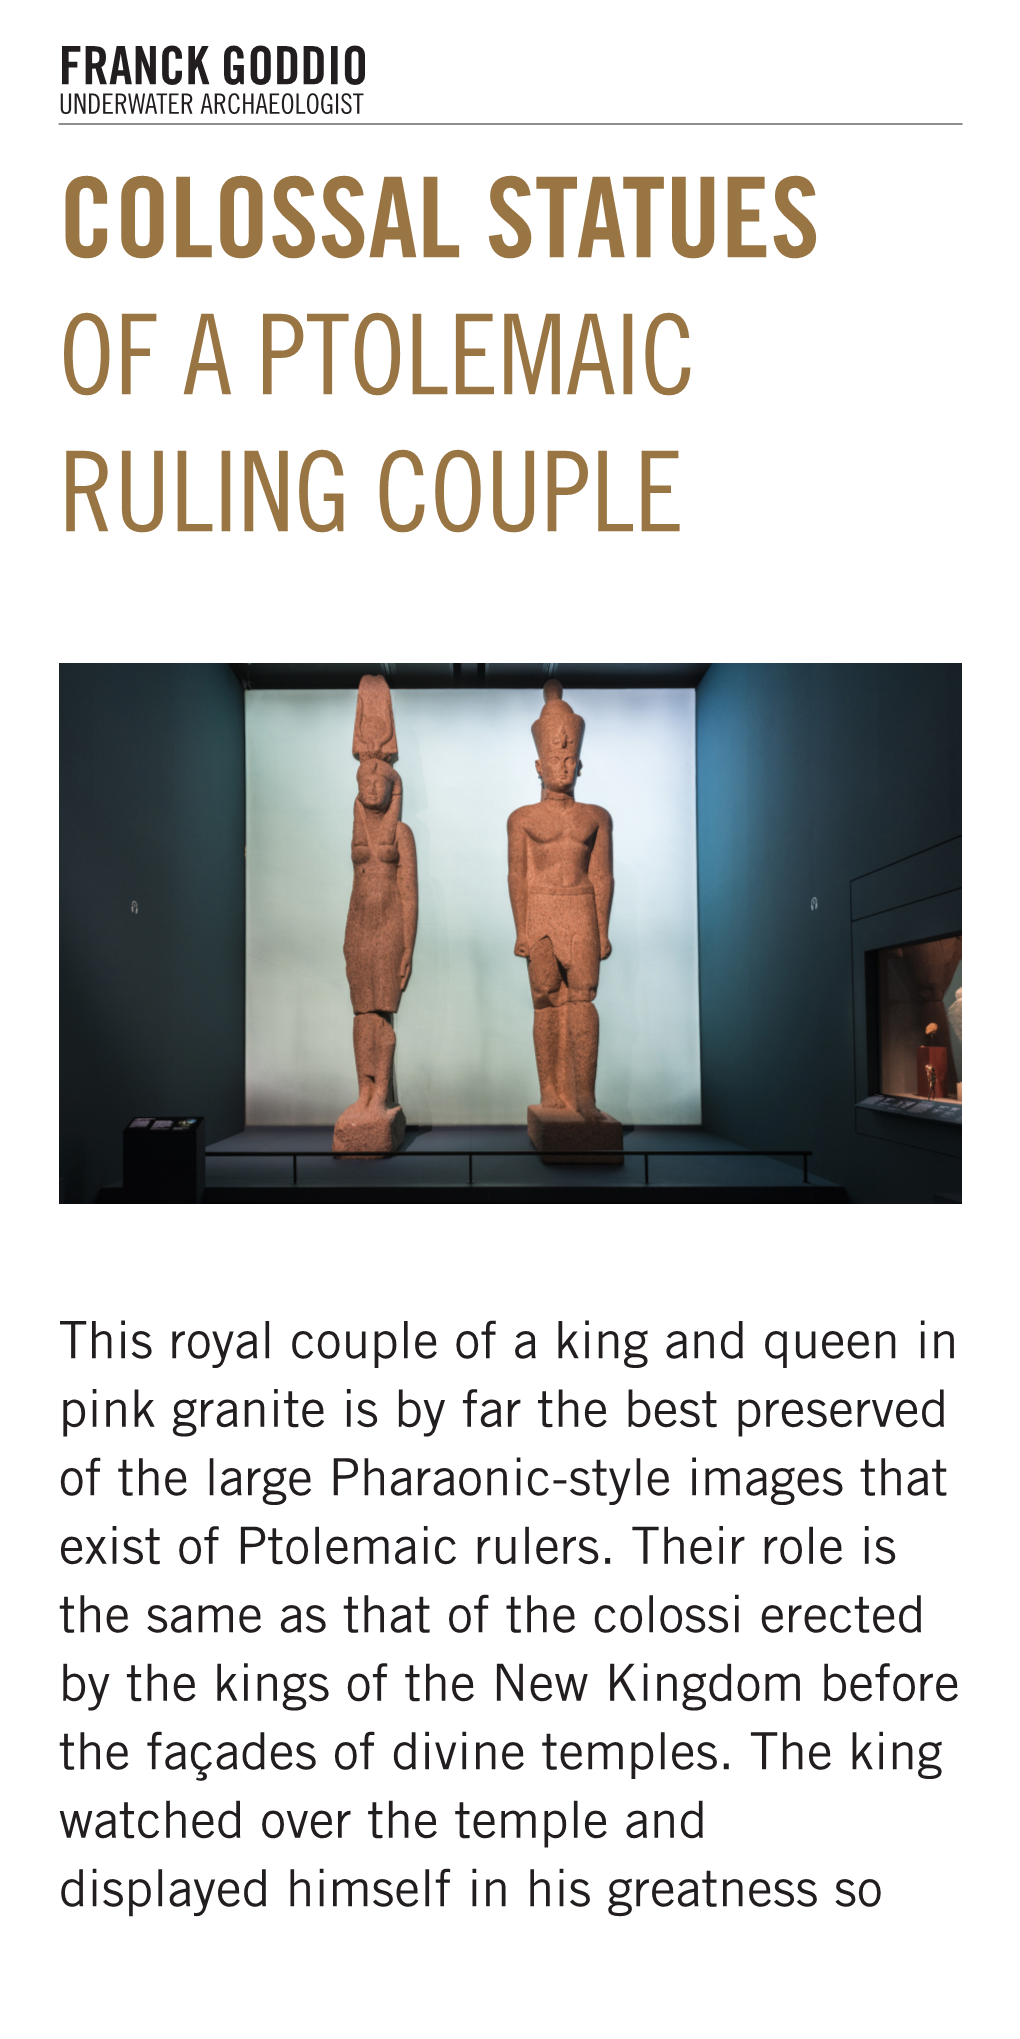 Colossal Statues of a Ptolemaic Ruling Couple